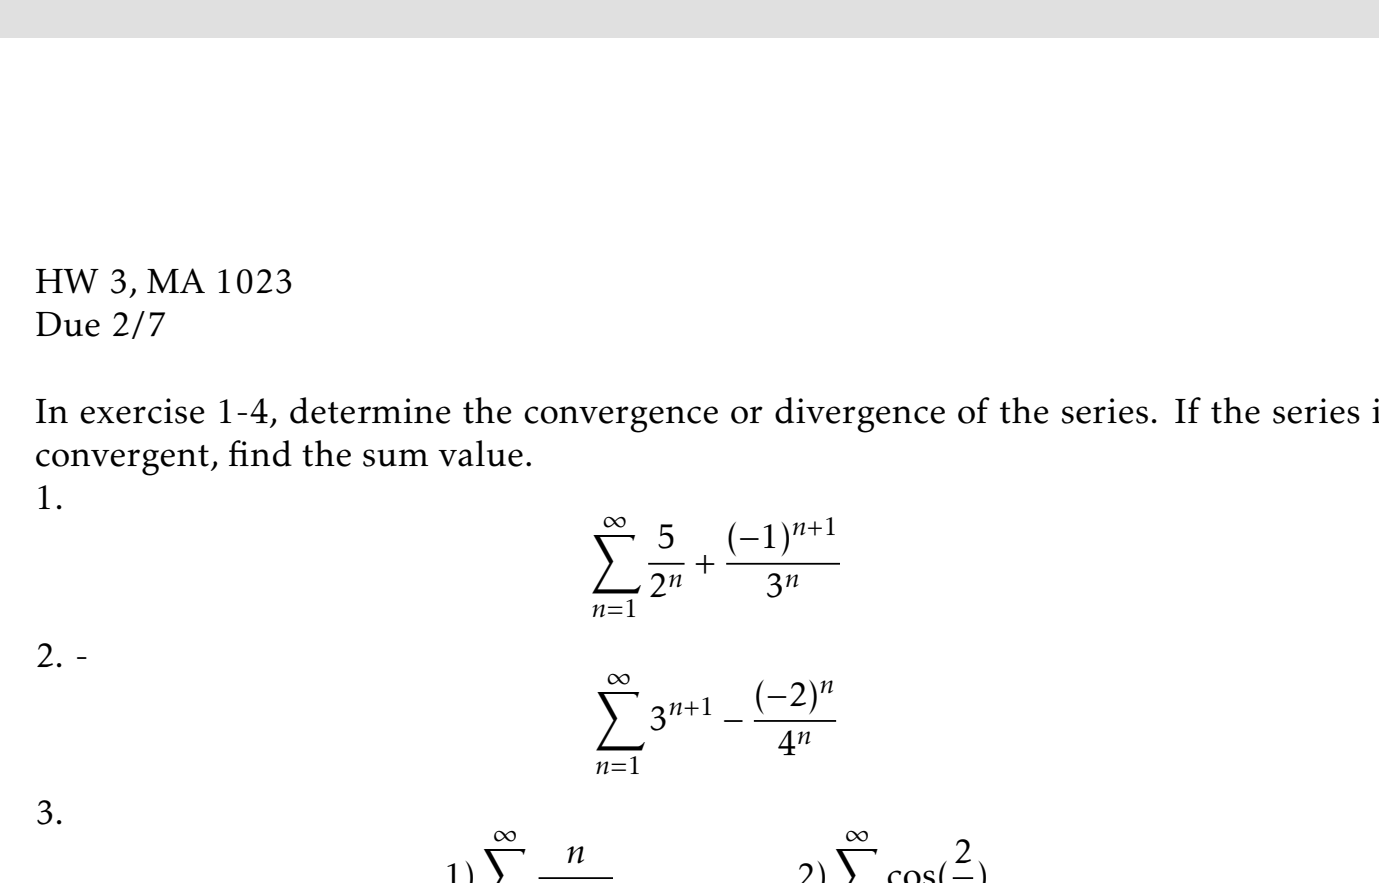 HW 3, MA 1023
Due 2/7
In exercise 1-4, determine the convergence or divergence of the series. If the series i
convergent, find the sum value.
1.
n+1
2"
n=1
Зи
2. -
(-2)"
3"+1
4"
n=1
2)E cos( 2)
п
3.
